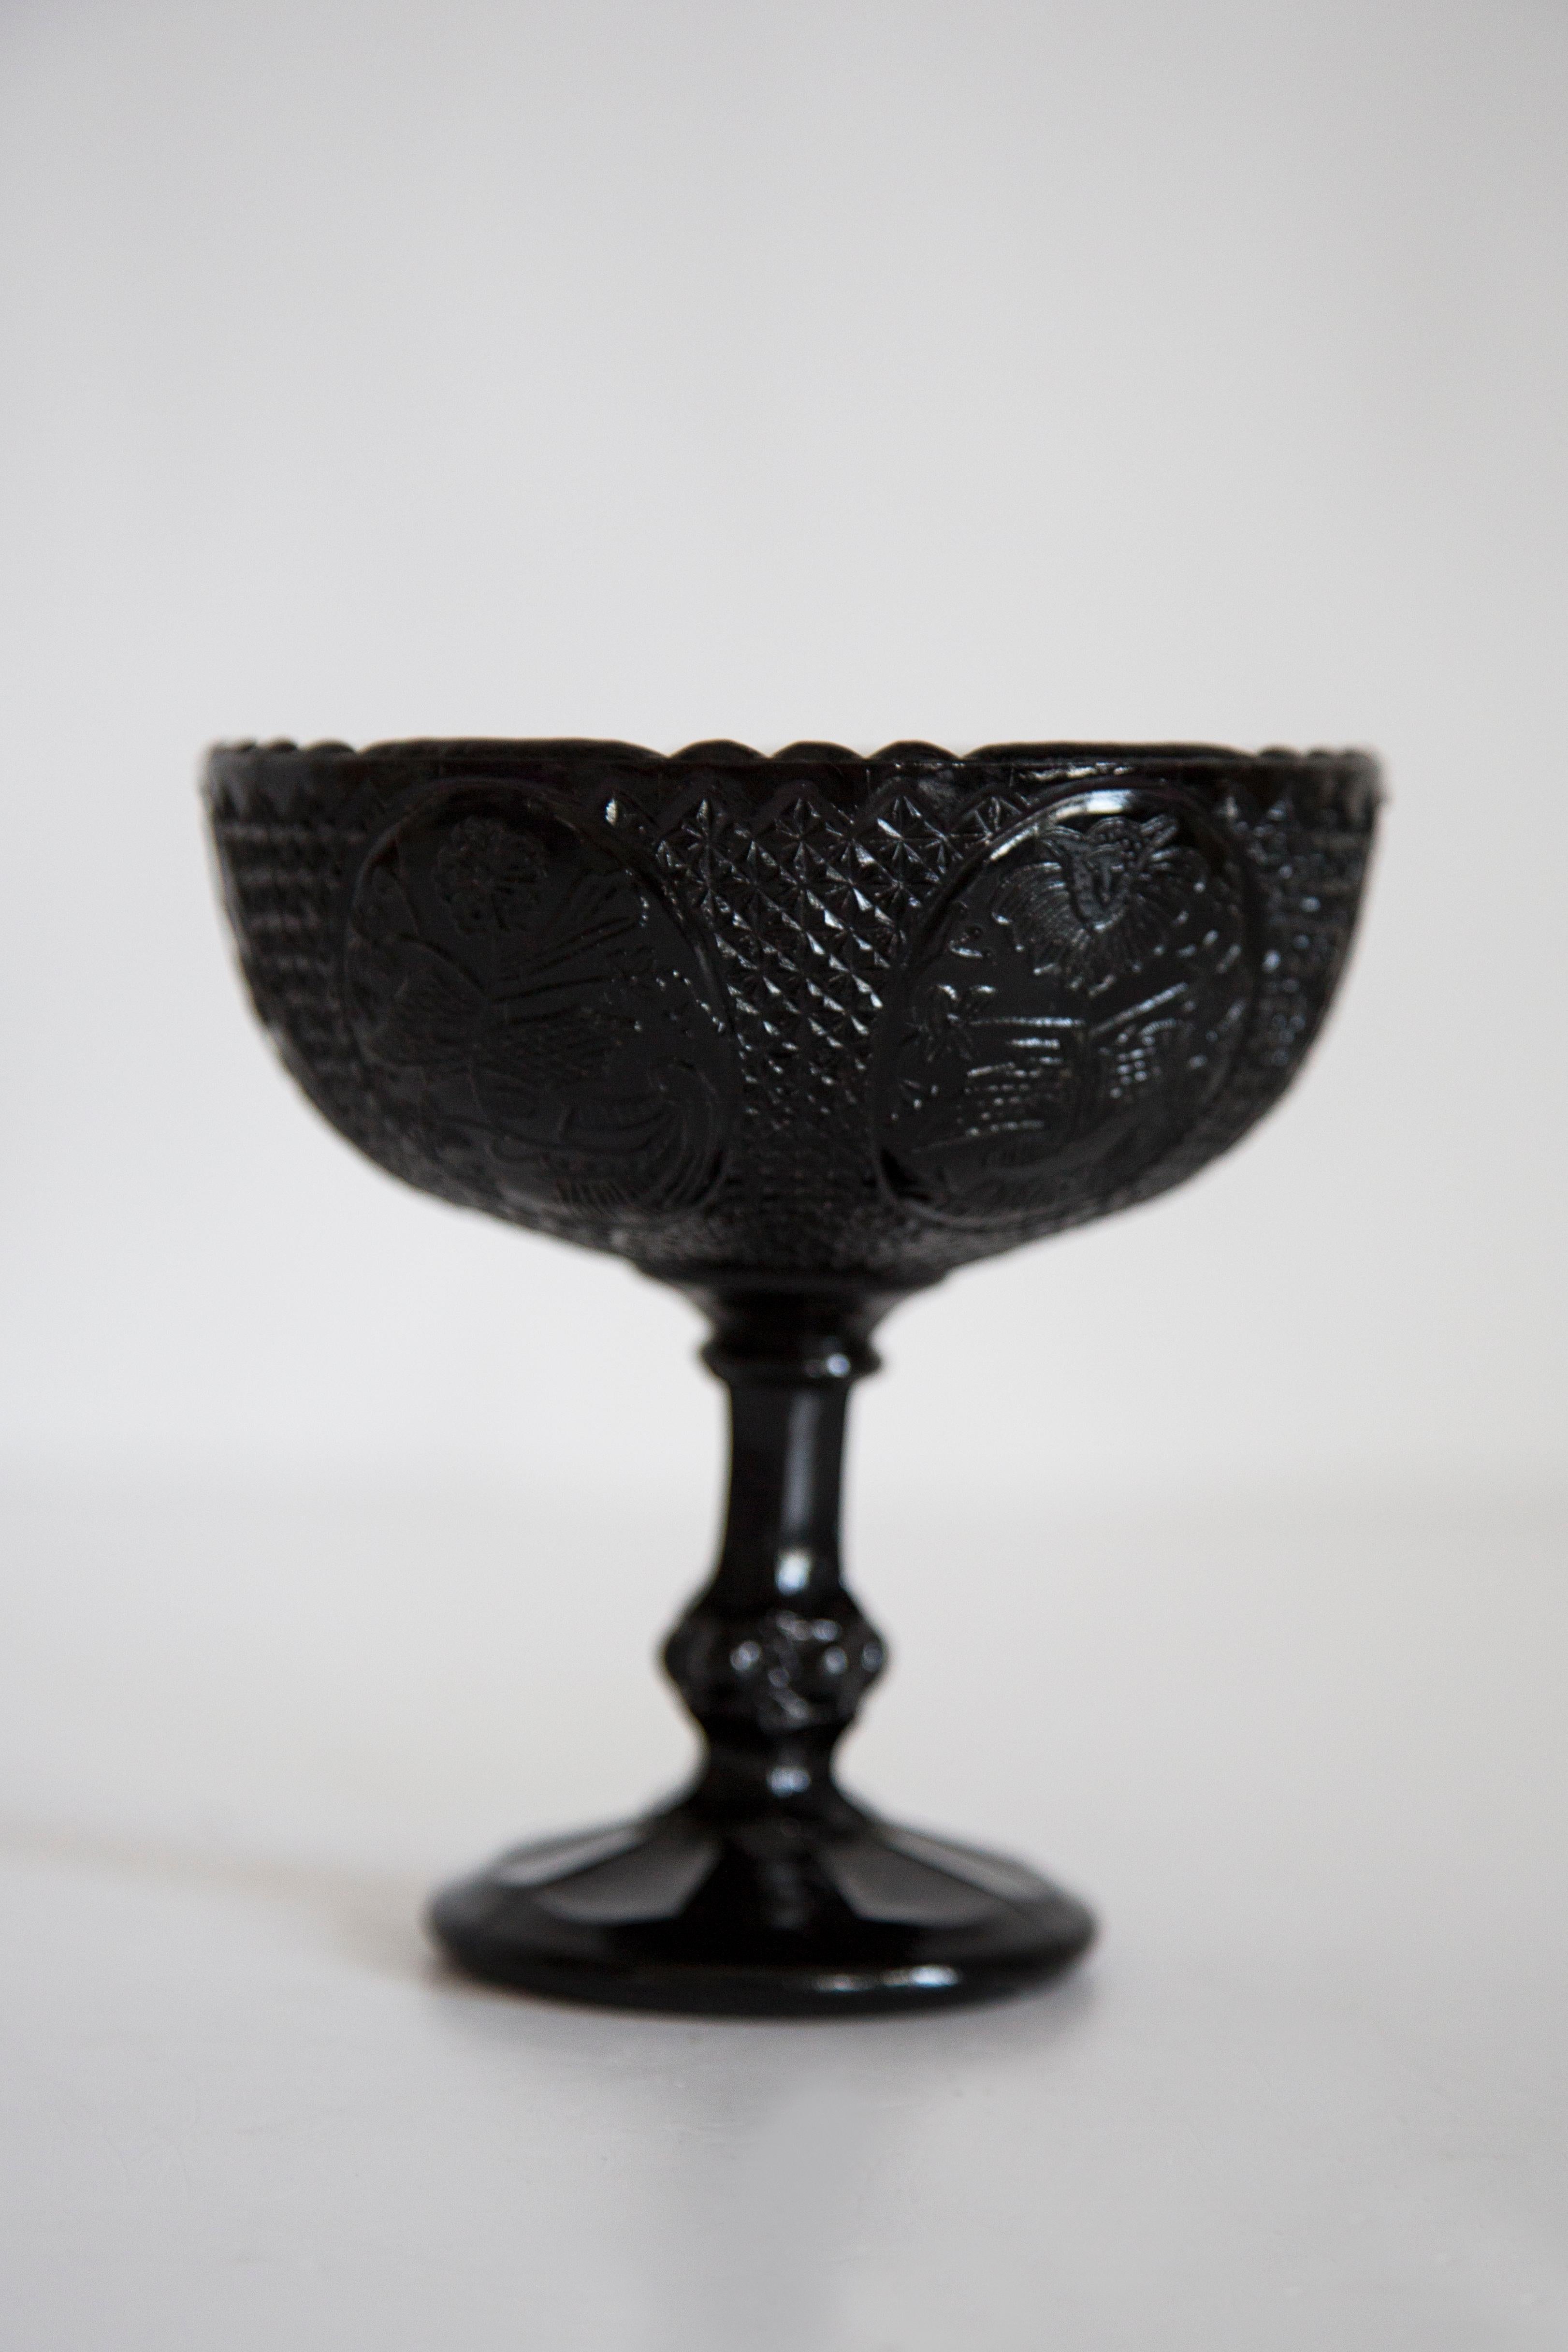 Beautiful decorative black glass plate/bowl from Italy. Plate is in very good vintage condition, no damage or cracks. Original glass. Unique piece for every table and interior! Only one piece available.